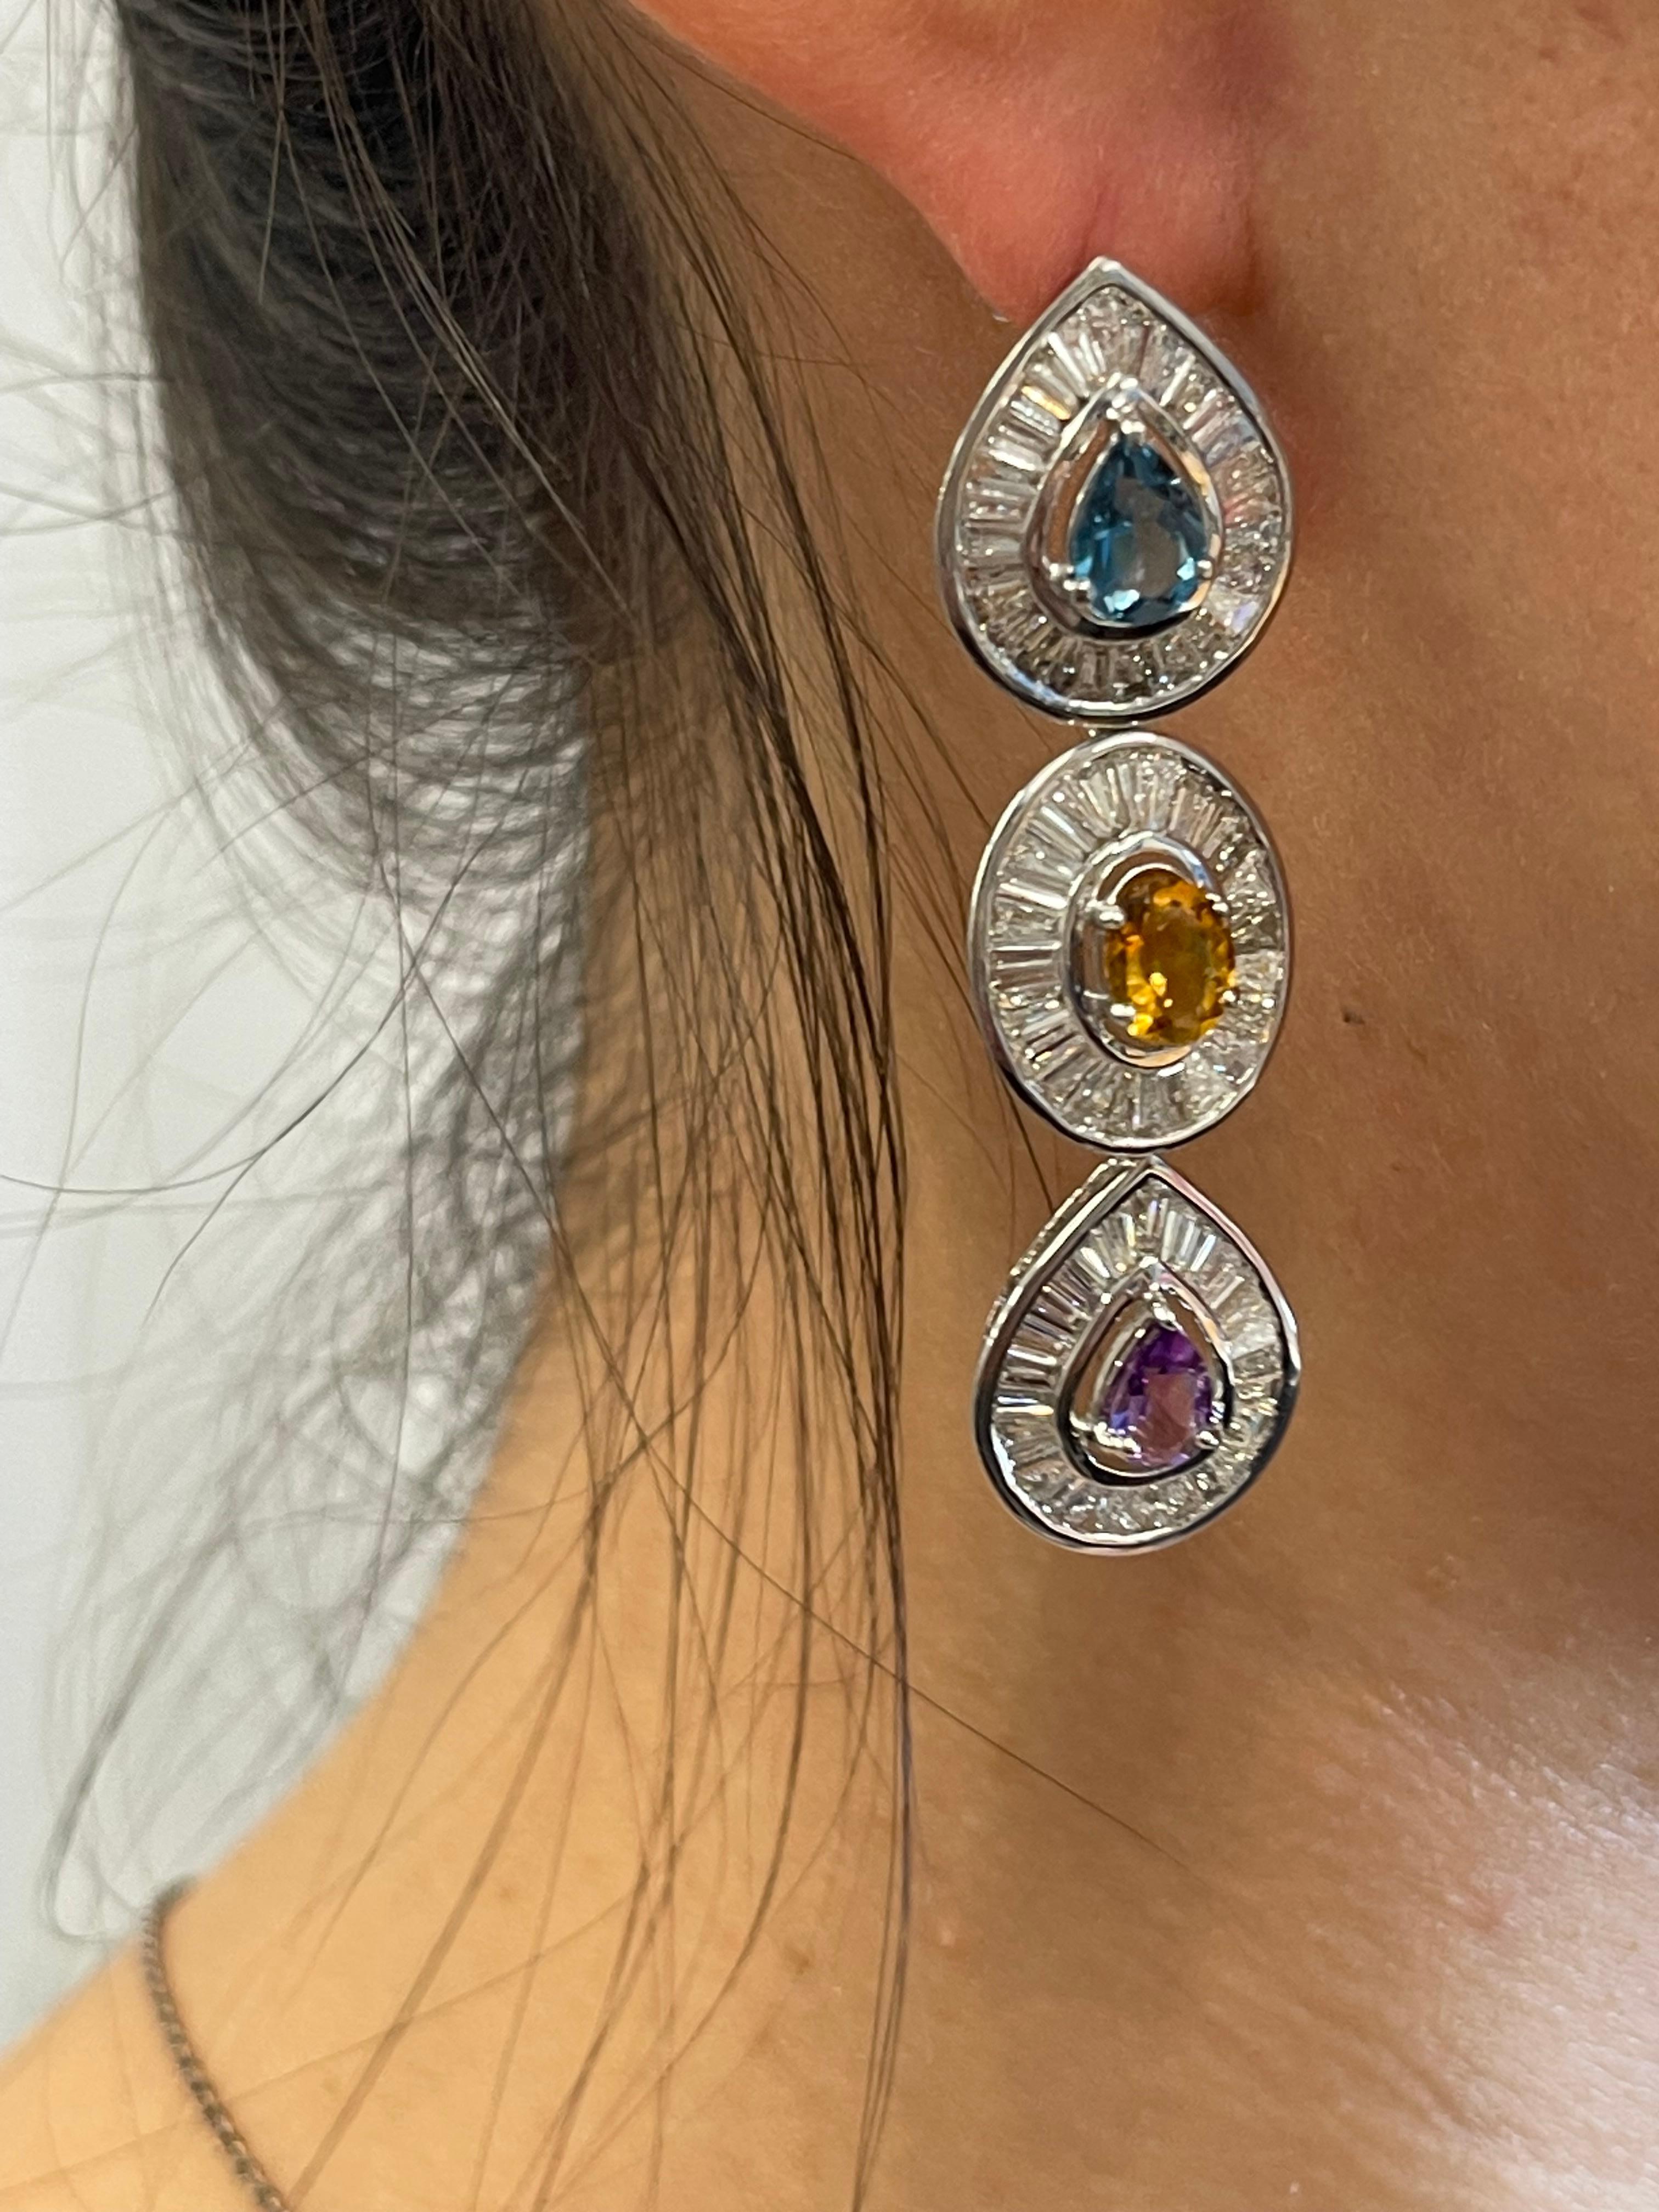 These are natural multi-colored sapphire earrings that feature a bevy of colors coupled with contrasting white brilliant diamonds. Mixed shaped colorful sapphires total 5.50 carats. This pair of stunning drop earrings makes a statement of incredible